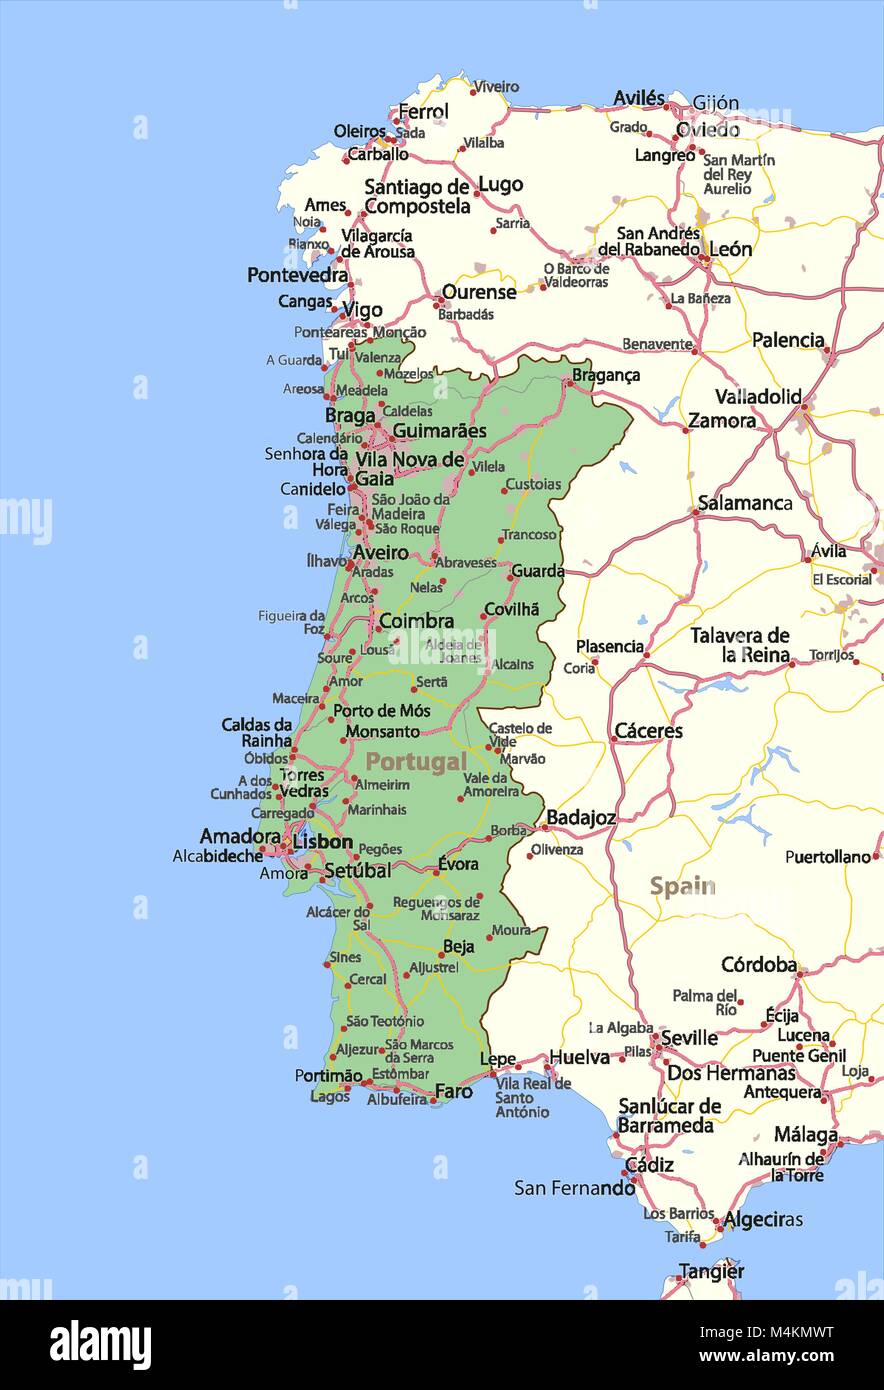 Portugal Map With Province. Map Of Portugal Vector Illustration Royalty  Free SVG, Cliparts, Vectors, and Stock Illustration. Image 183542794.